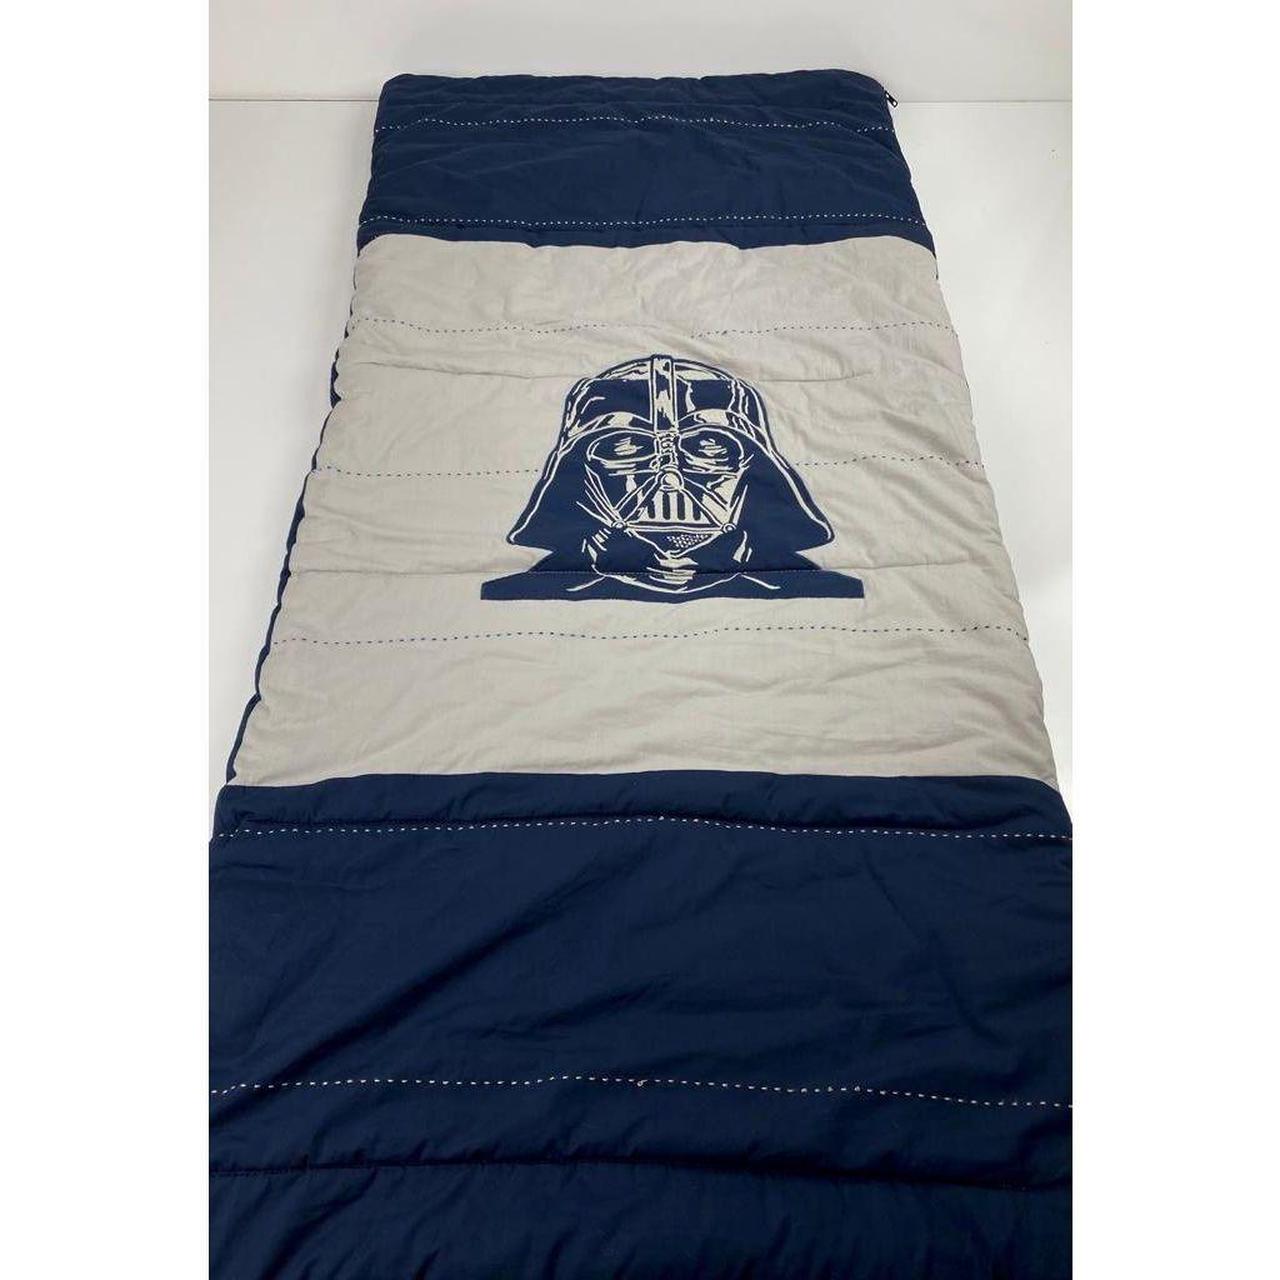 Pottery Barn Sleeping Bag for Sale in Bothell WA  OfferUp